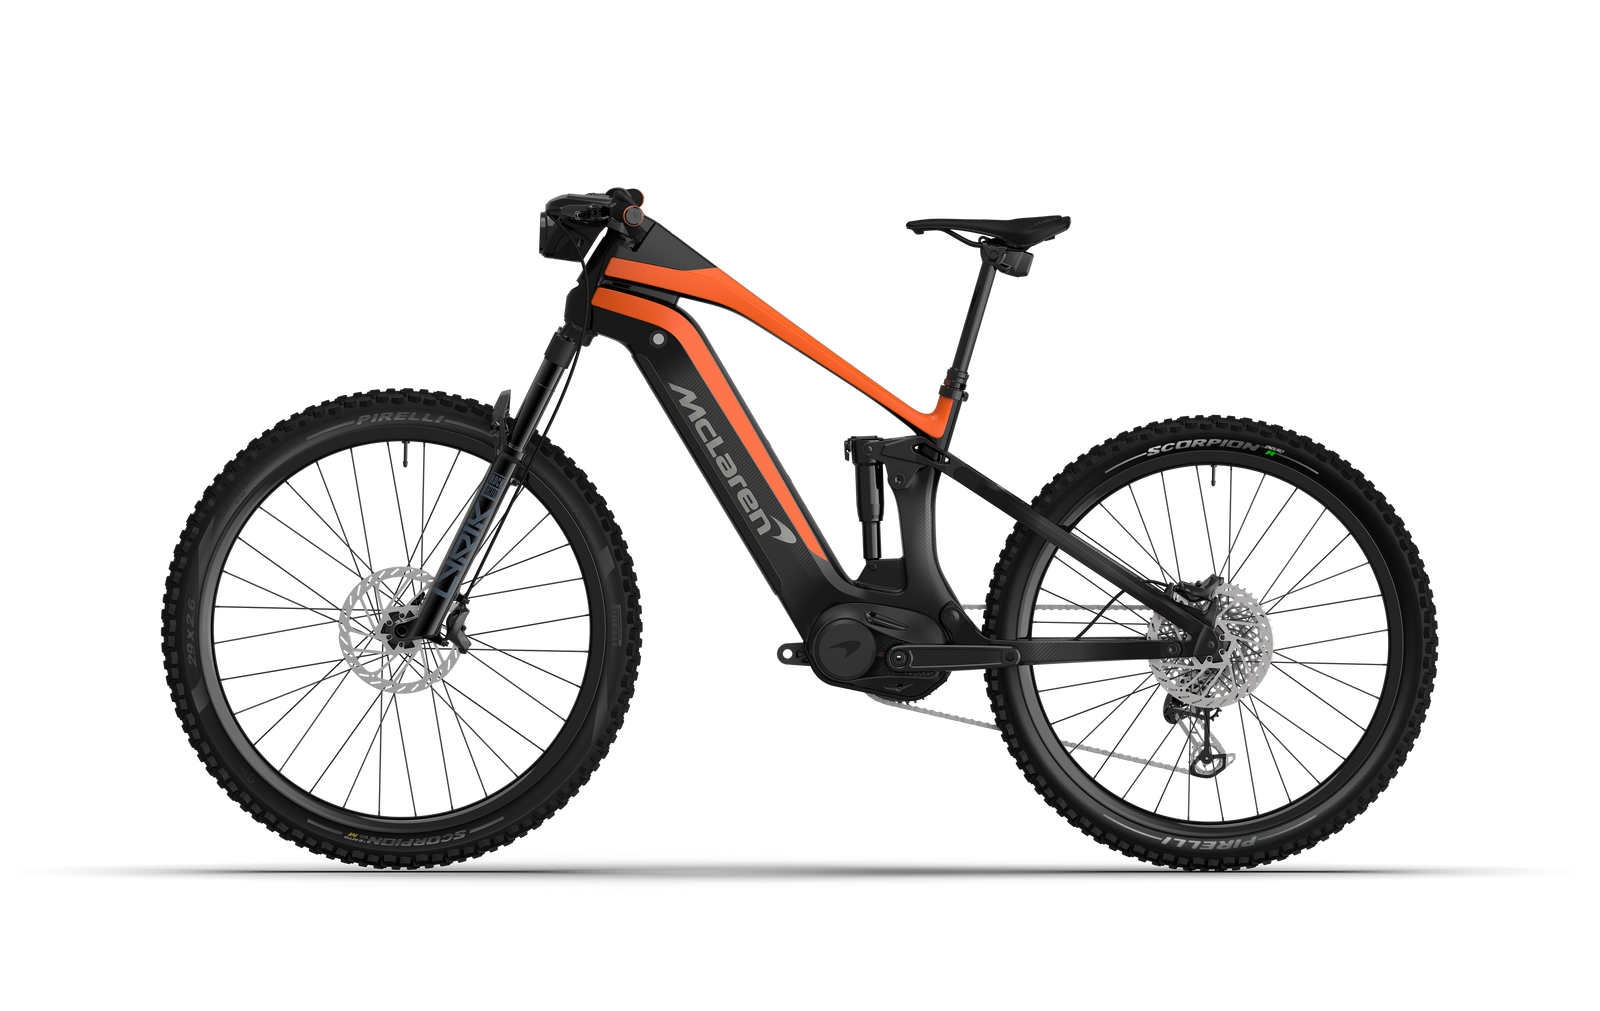 Non-drive side view of the McLaren Extreme eMTB featuring a 600W motor, 160mm of front and 145mm rear travel, and robust but lightweight carbon frame wrapped in 3k carbon weave.